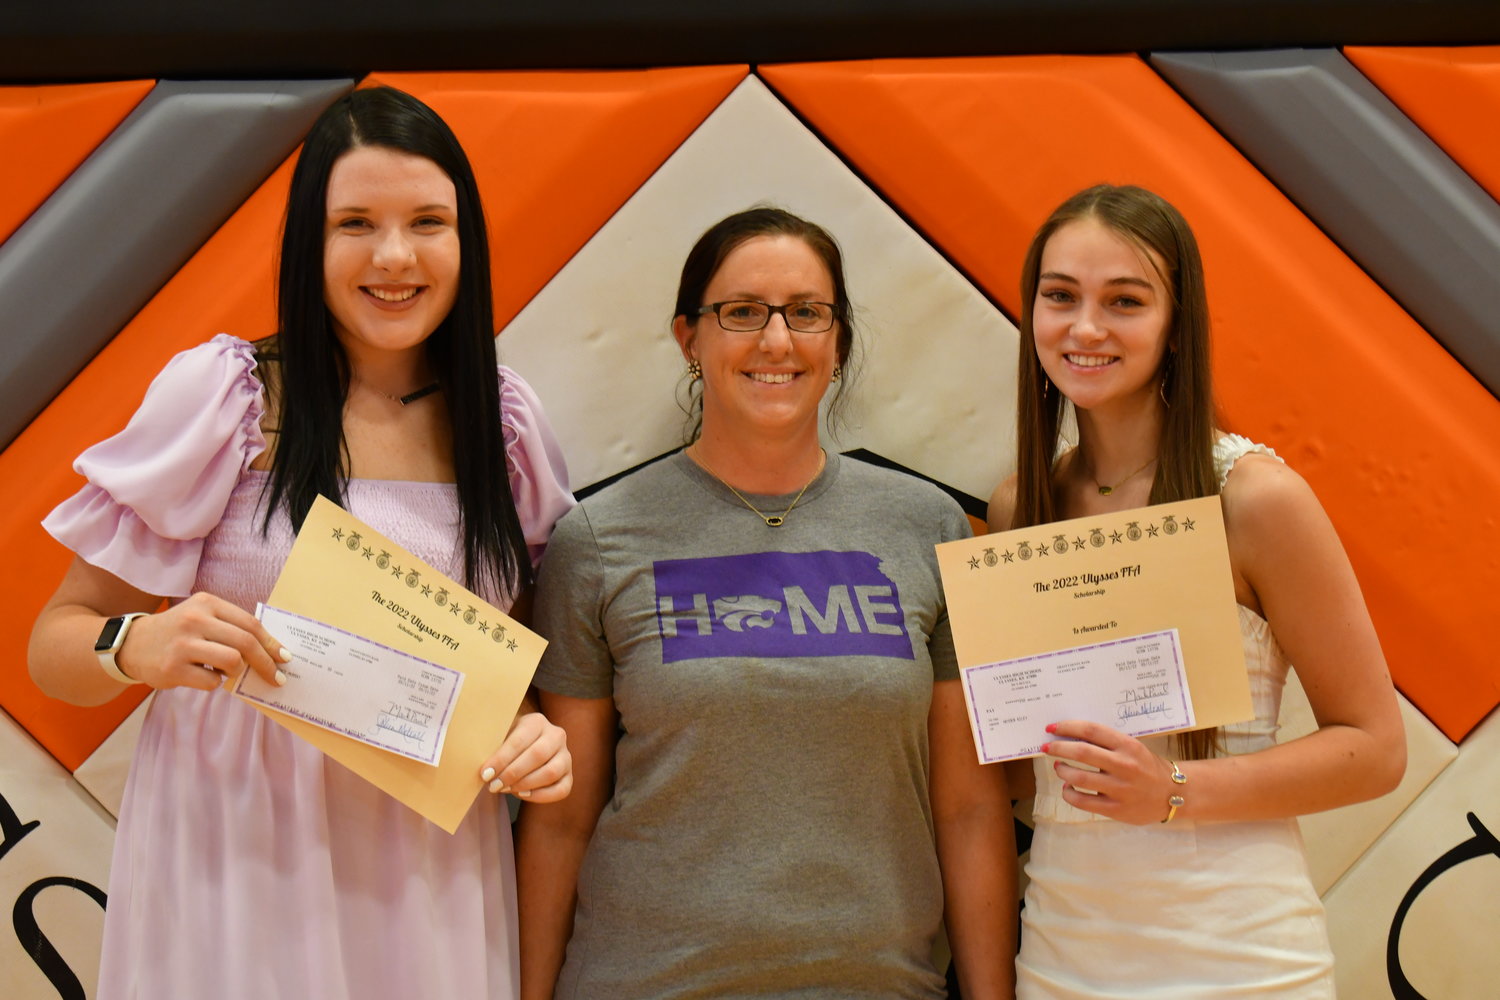 Senior Awards — Grace Murray and Hayden Riley were given the Ulysses FFA Scholarship from Megan Rice on Friday, May 13, 2022.